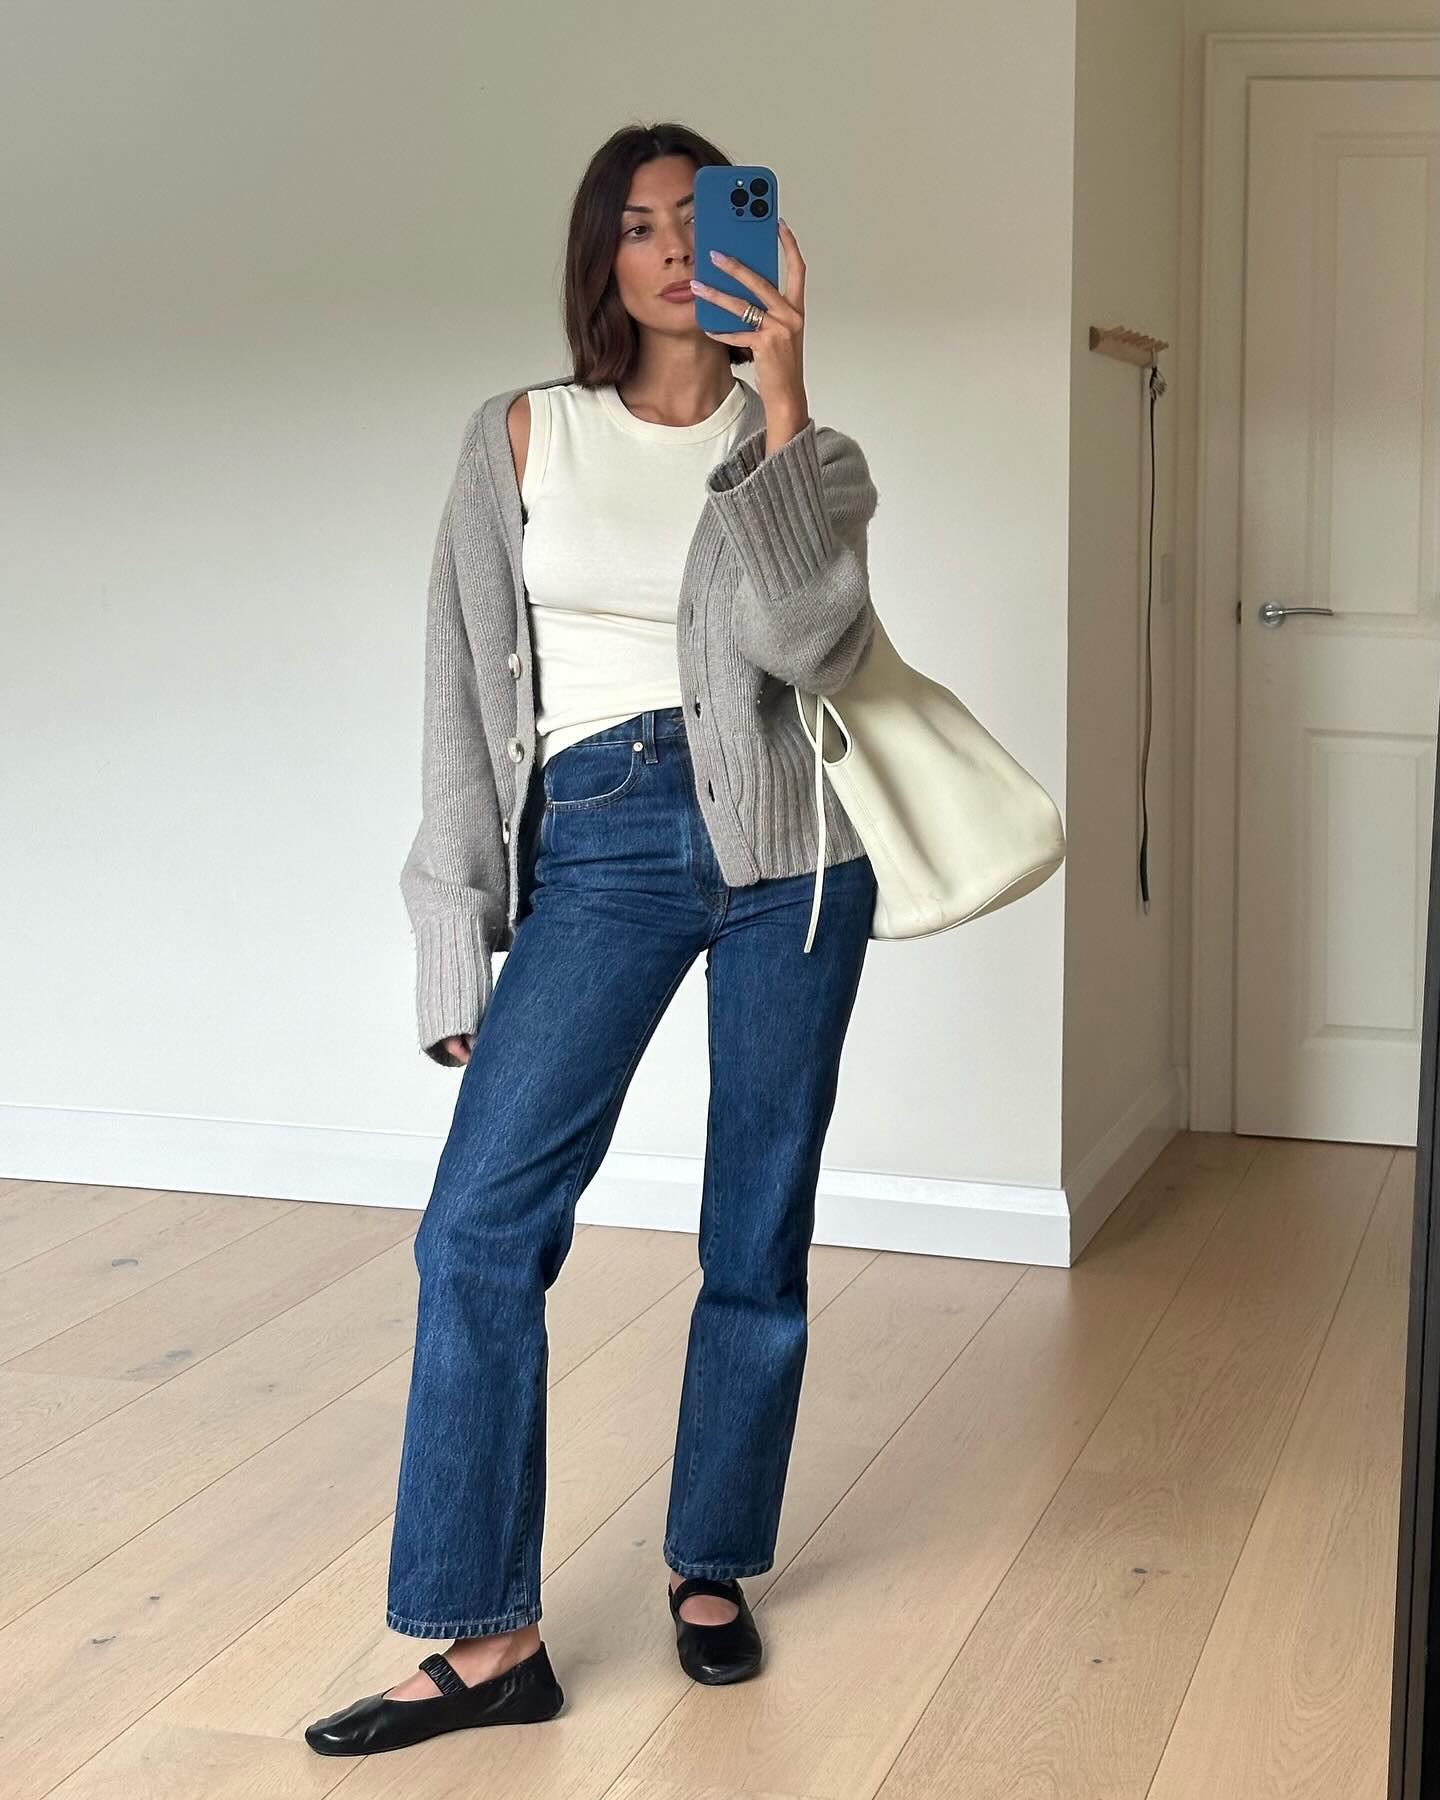 fashion influencer Marianne Smyth poses for a mirror selfie with a blue iPhone case, gray cardigan, ivory tank top, cream leather tote bag, dark wash jeans, and black Mary-Jane flats